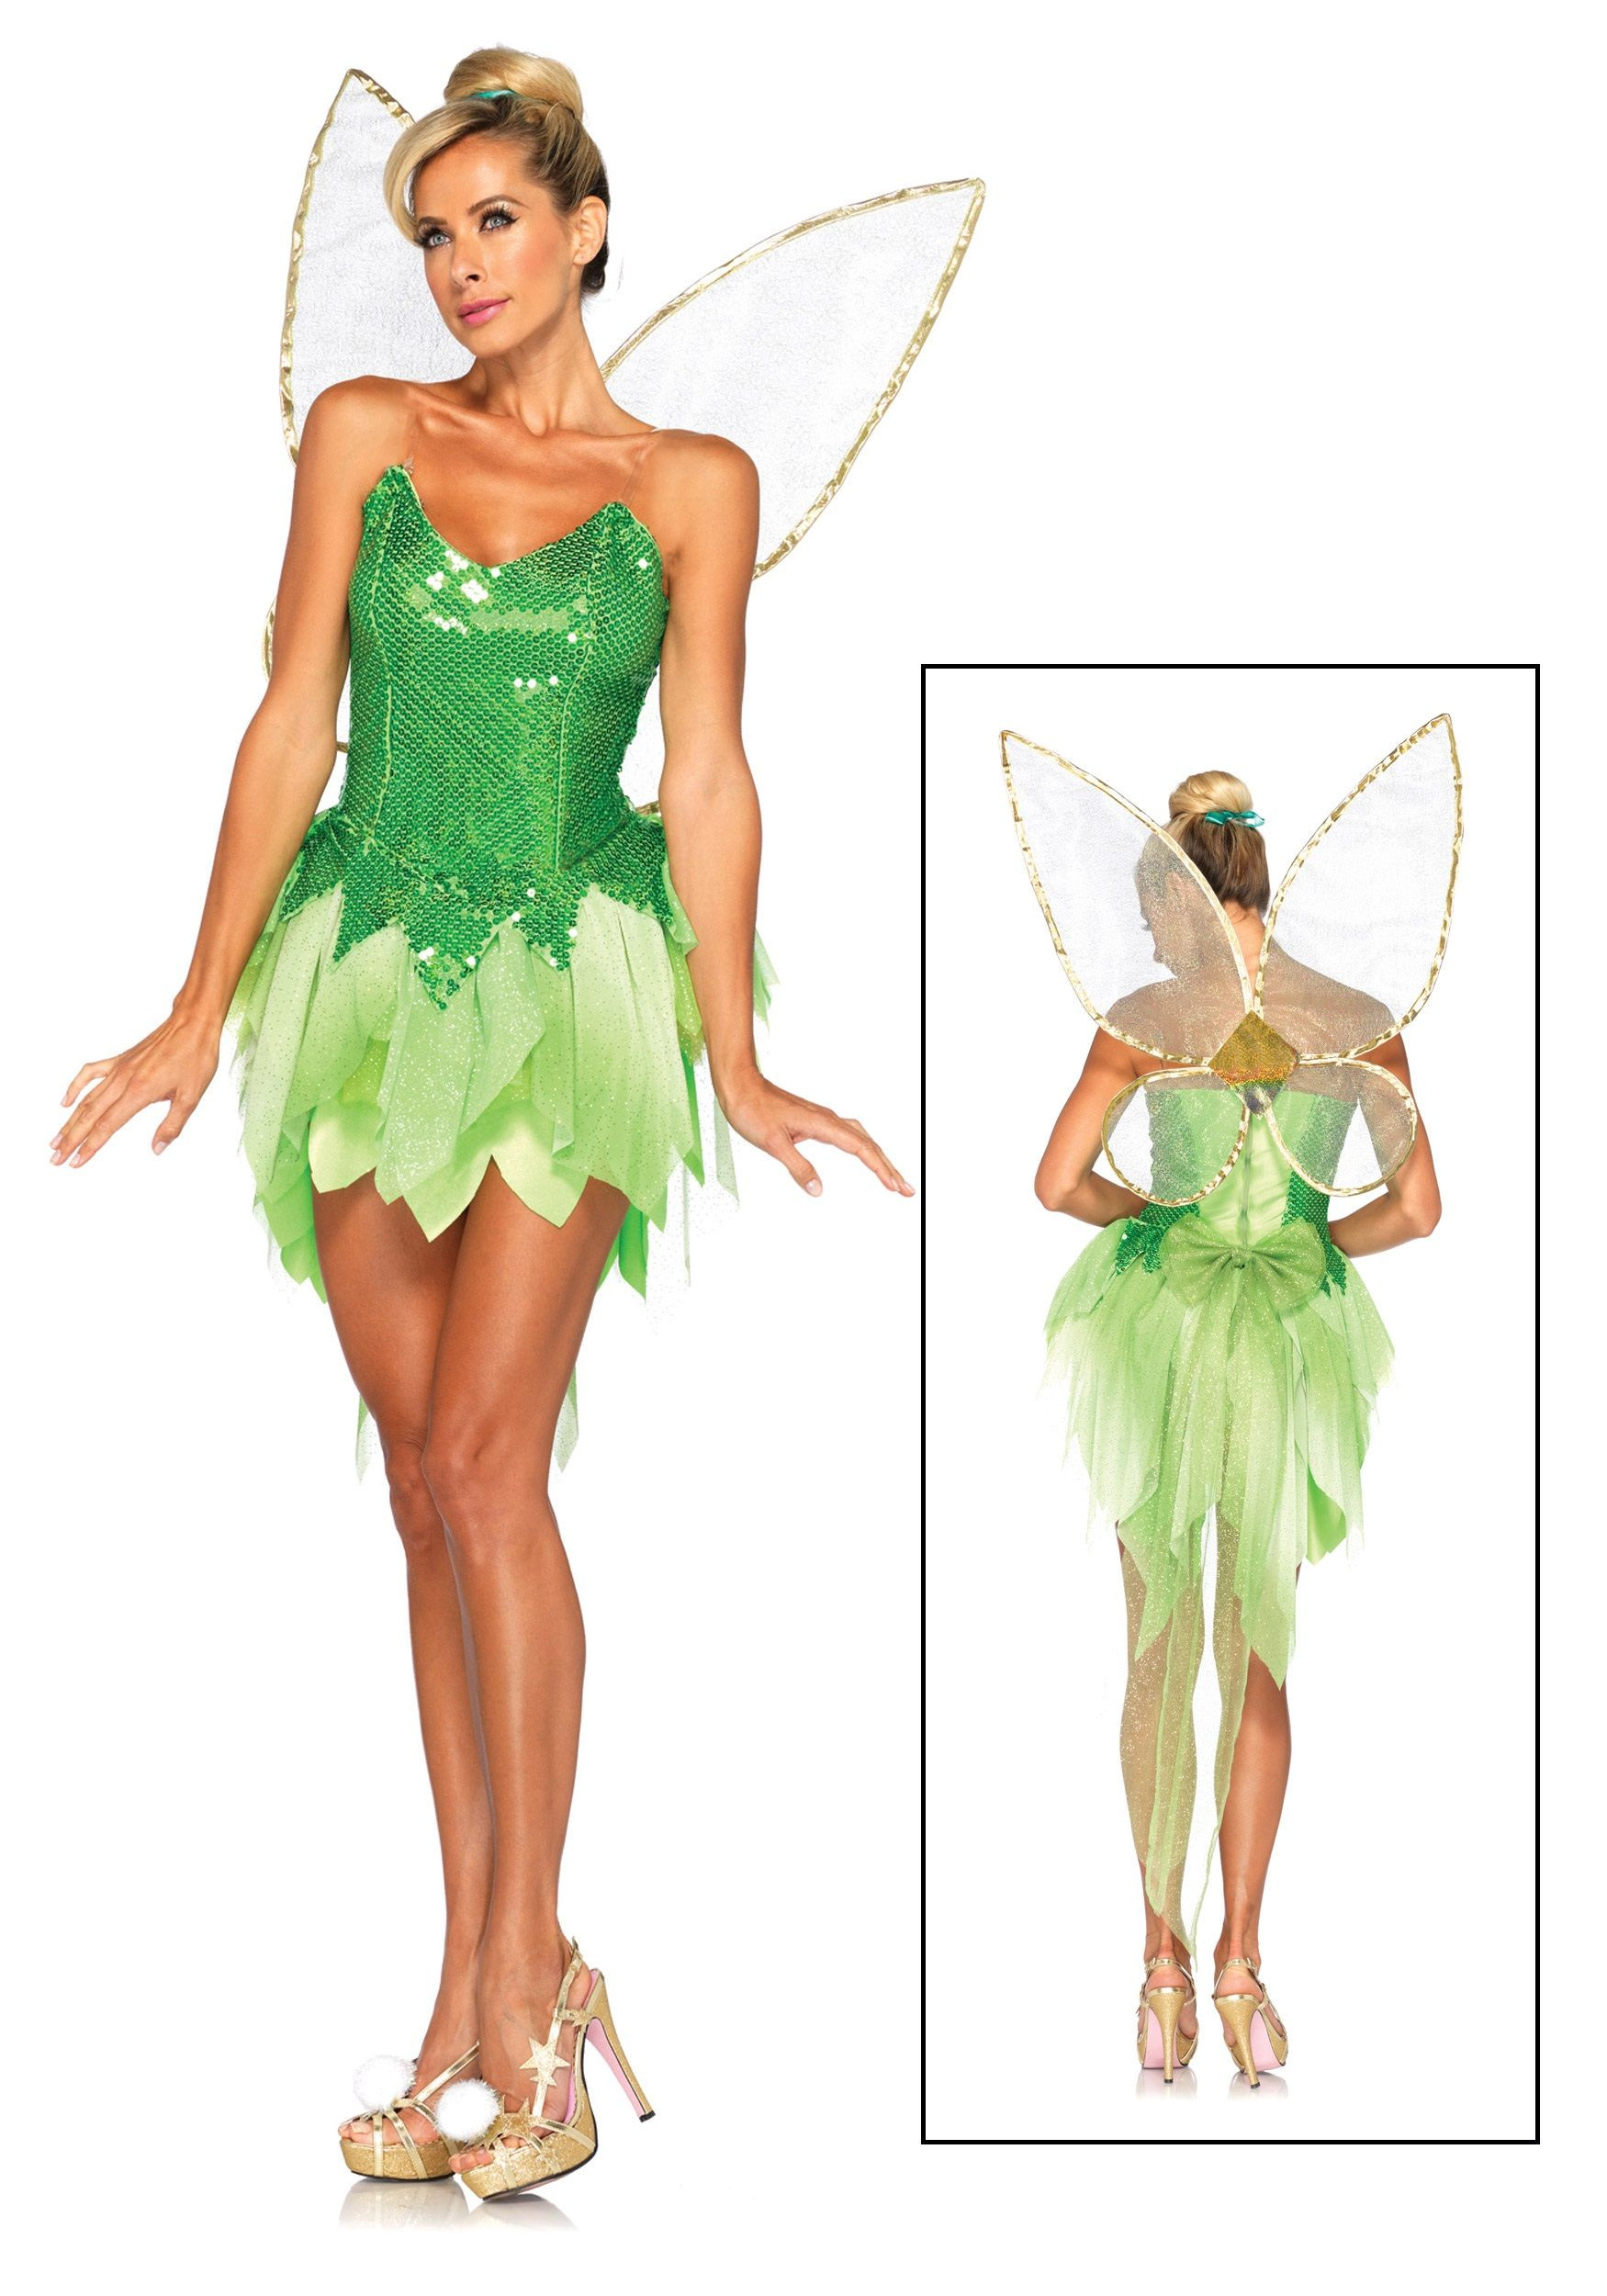 Tinkerbell Costume Adults DIY
 Womens Disney Pixie Dust Tink Costume in 2019